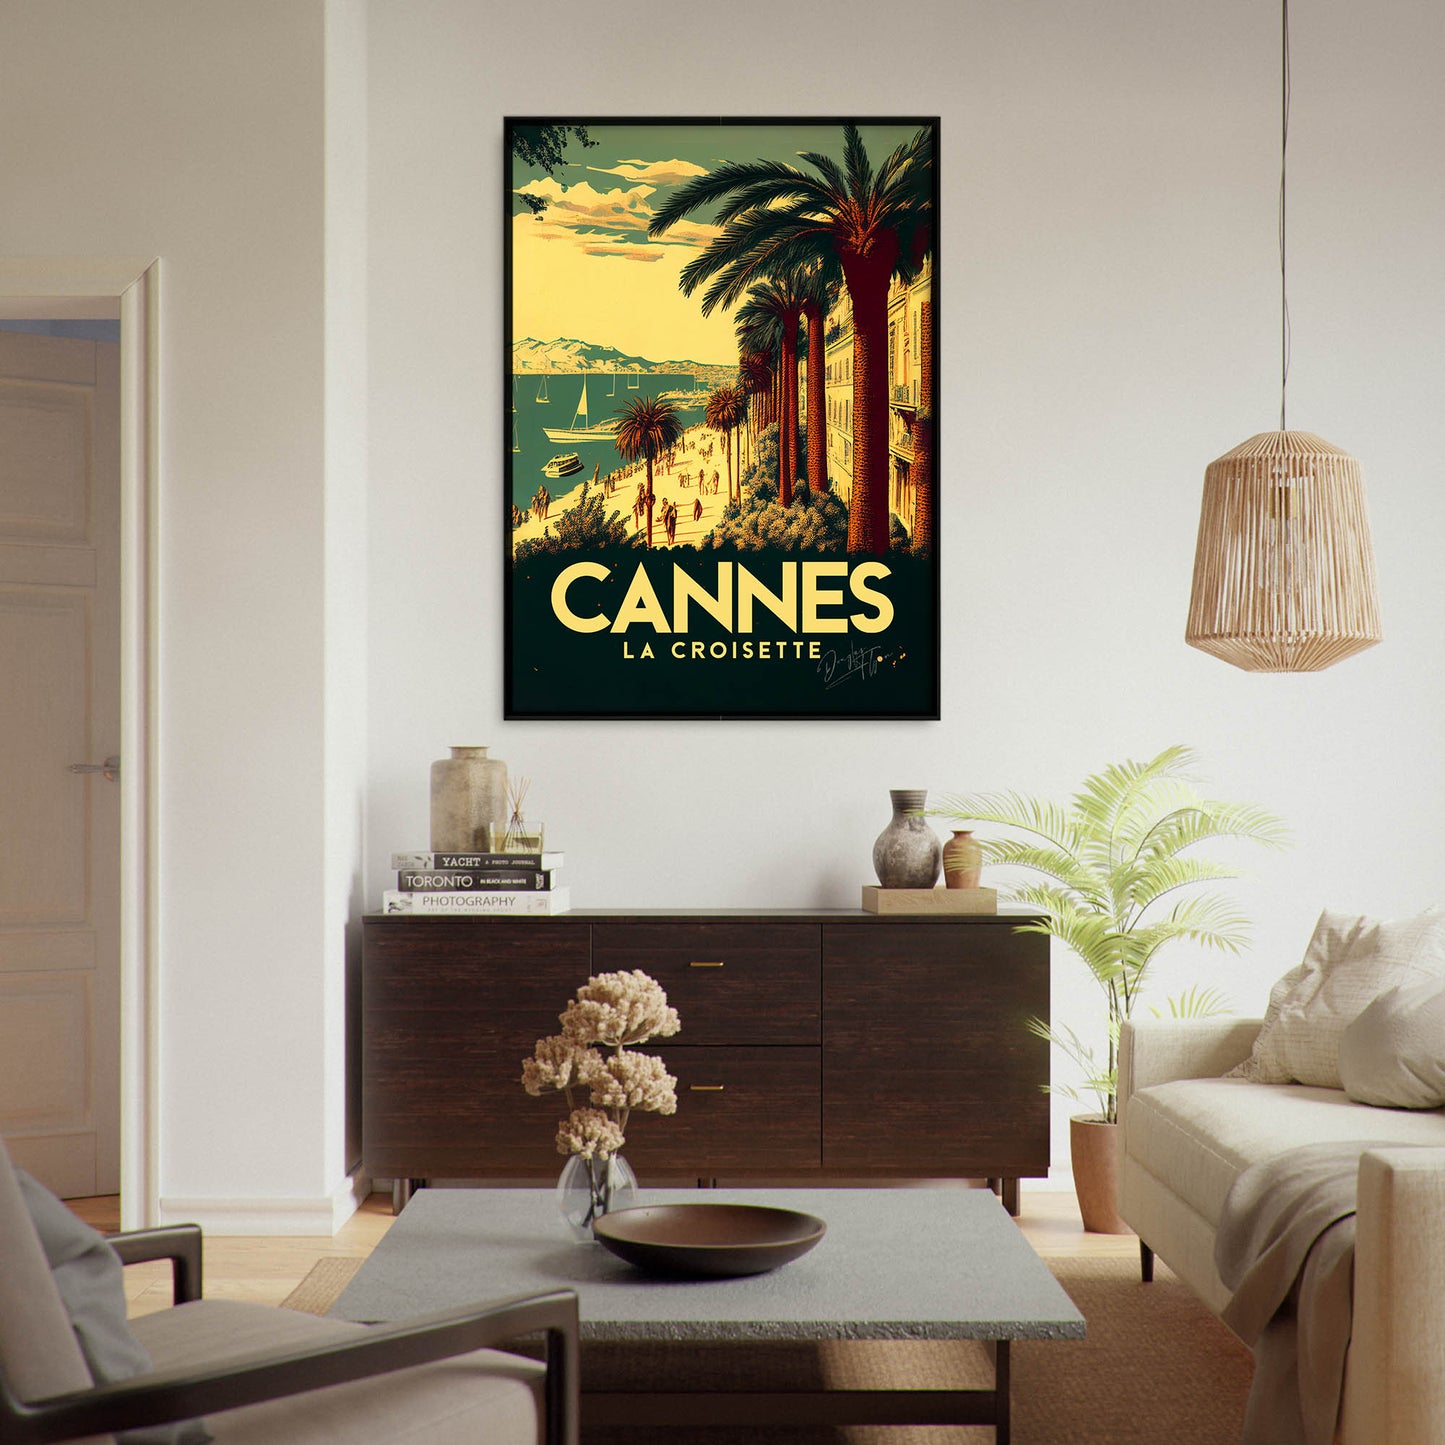 »Cannes, travel poster no 2« retro poster